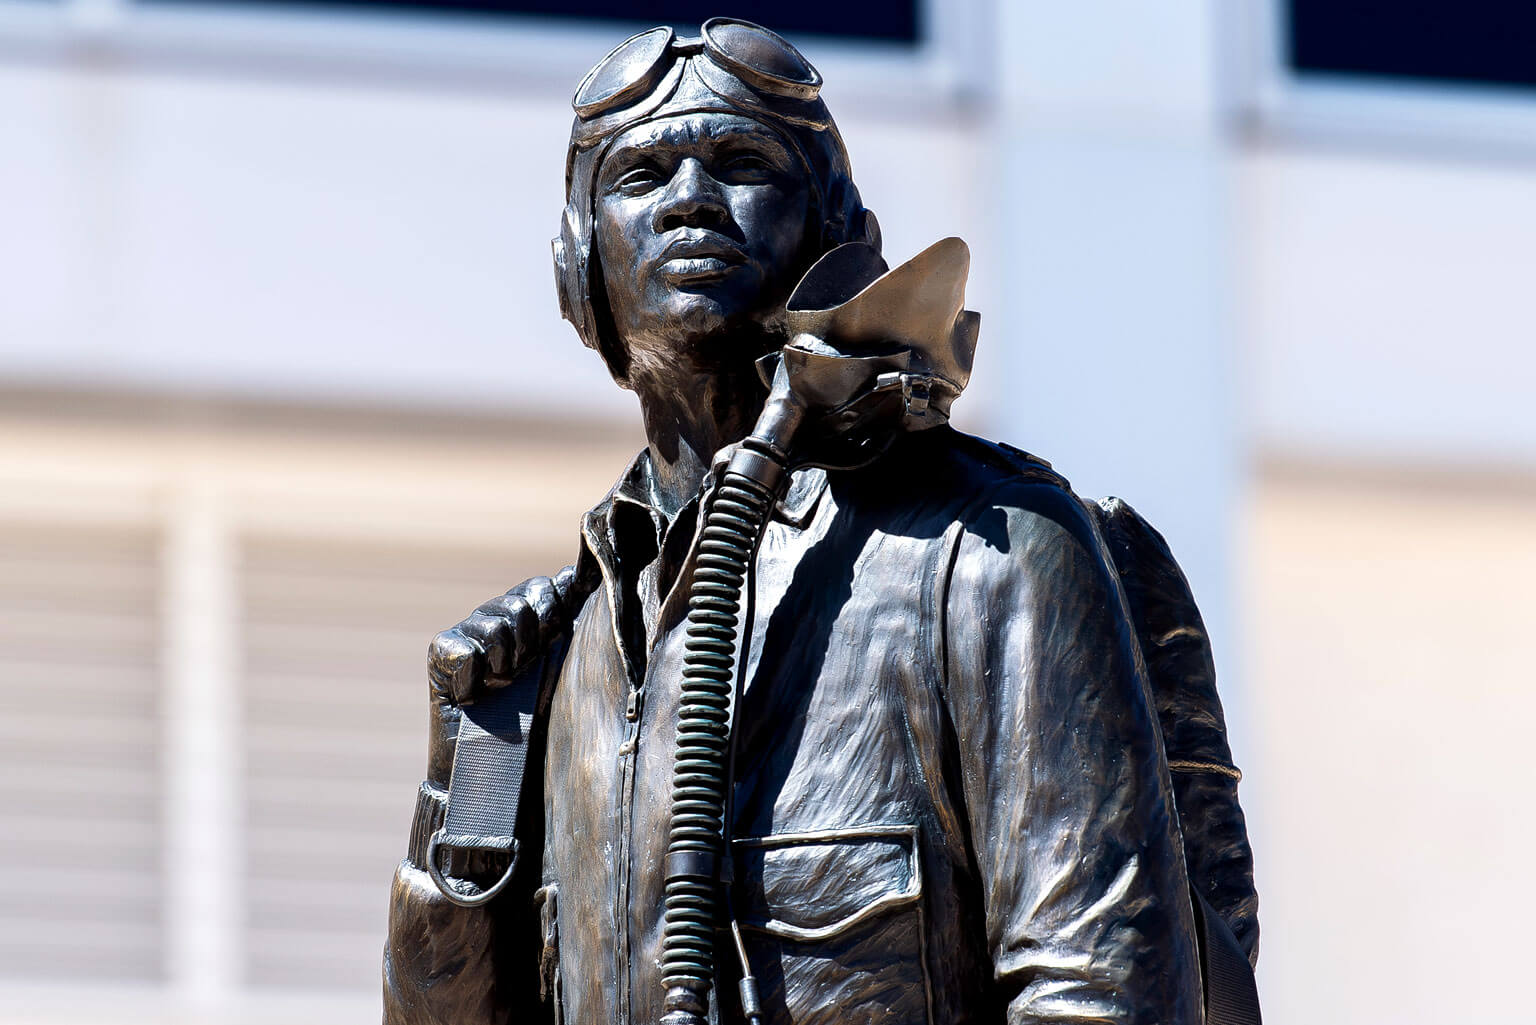 The Tuskegee Airman statue is pictured at the U.S. Air Force Academy Honor Court.